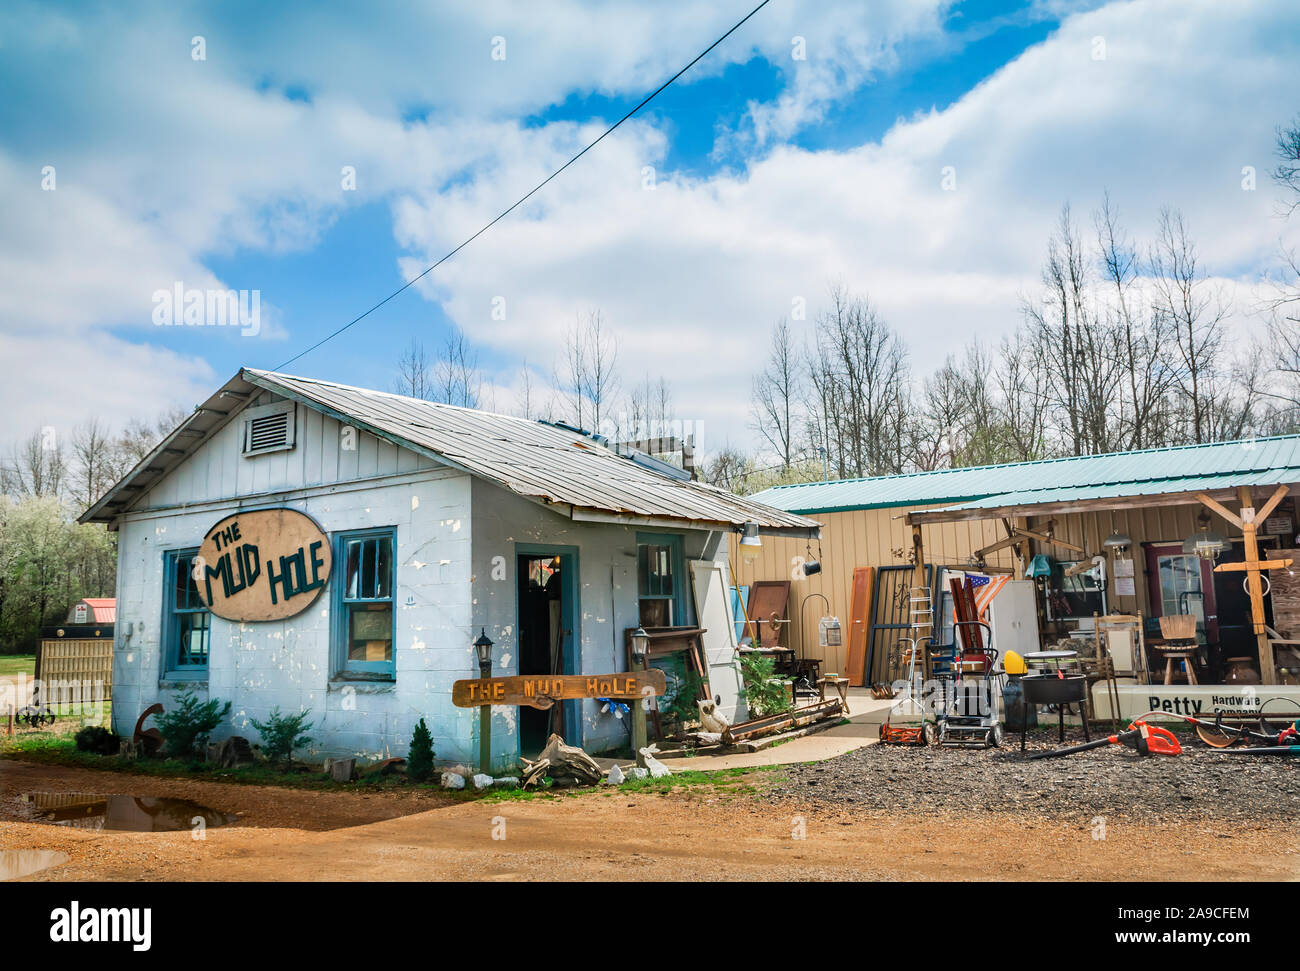 The Mud Hole is a thrift store along Highway 82 in Reform, Alabama. Stock Photo